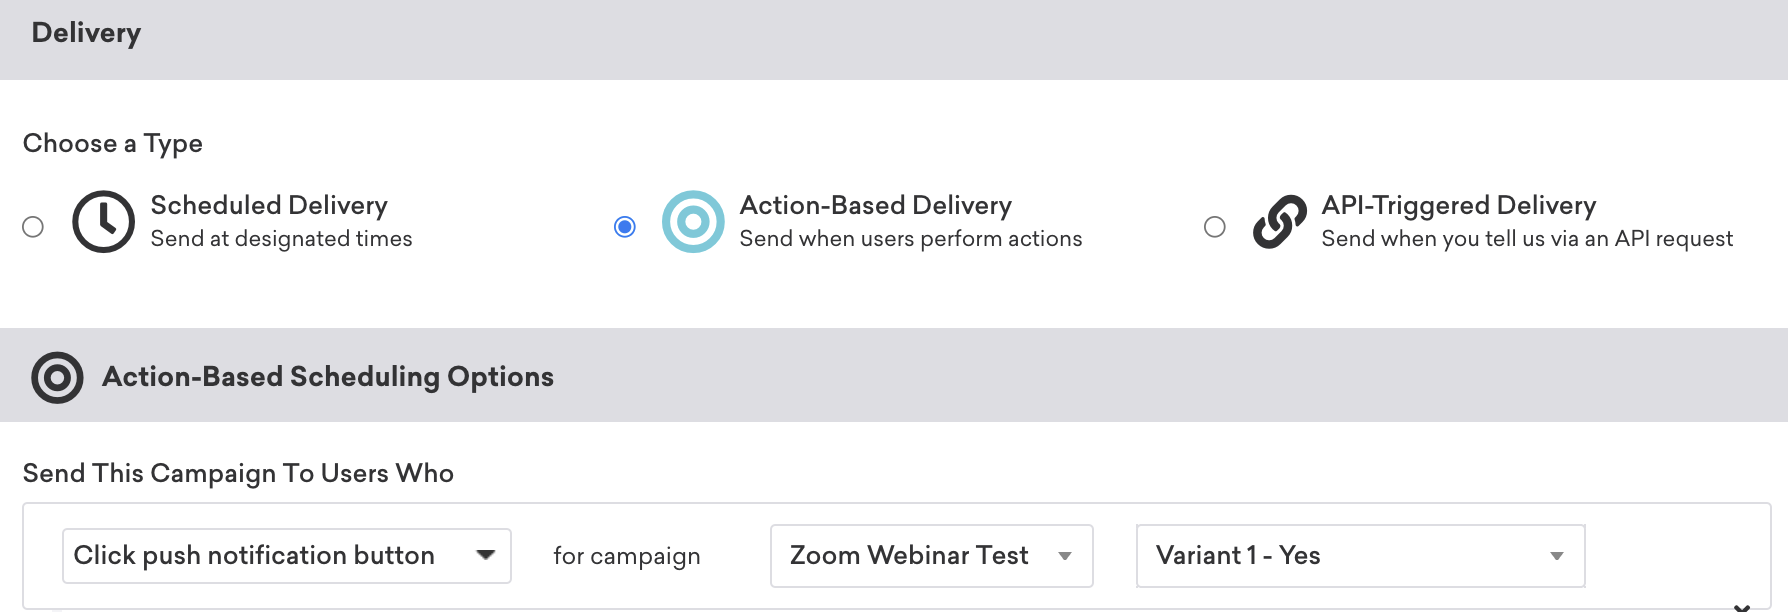 A action-based campaign that will be sent to users who clicked a button for a specific campaign.